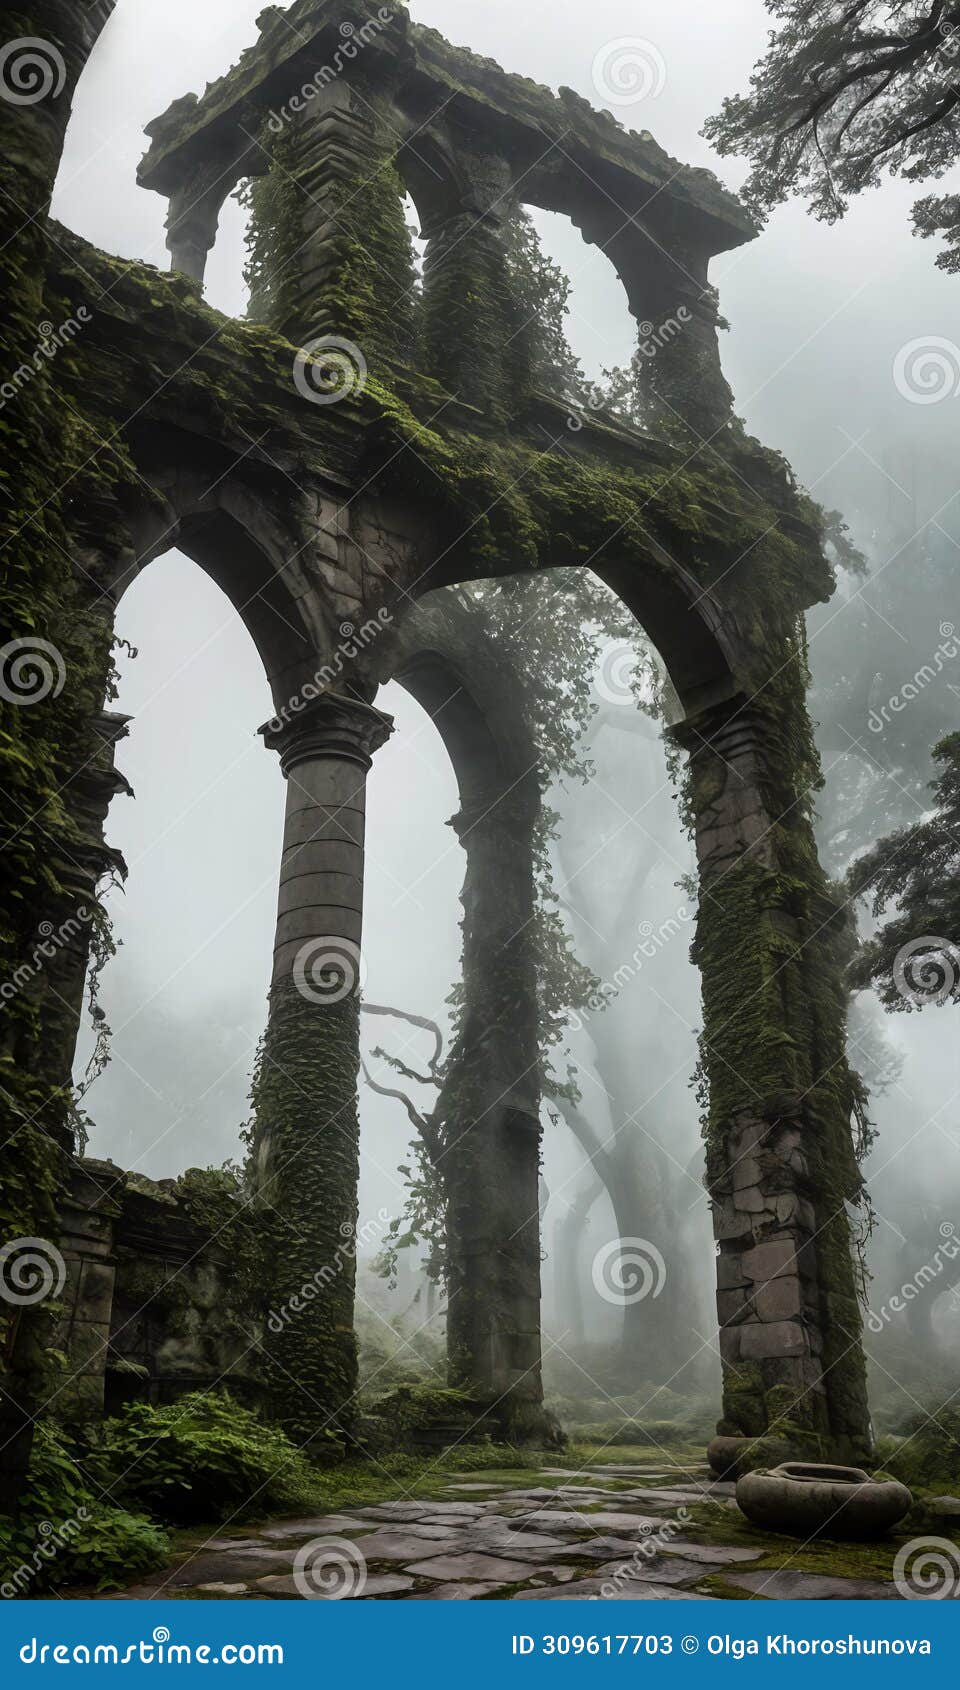 mist-clad ruins. the remnants of an ancient castle, shrouded in mist.